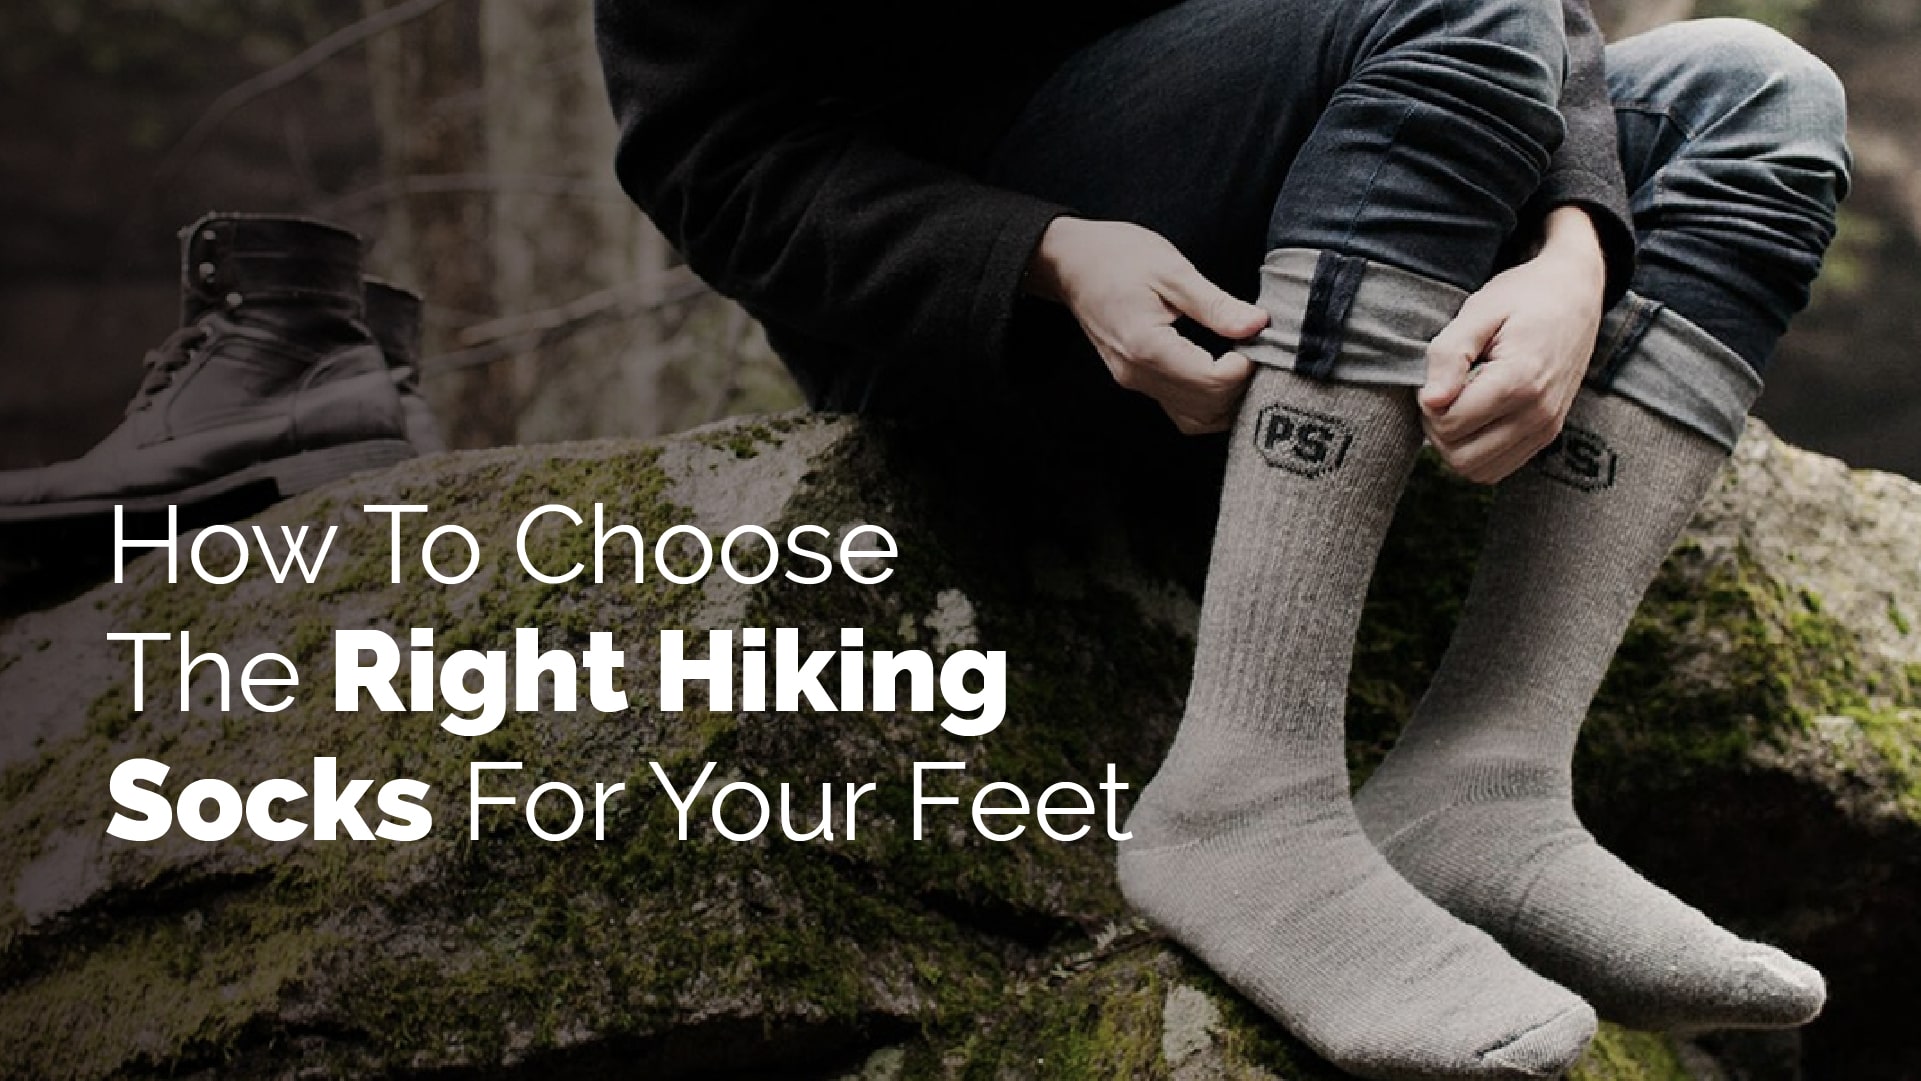 How To Choose The Right Hiking Socks For Your Feet